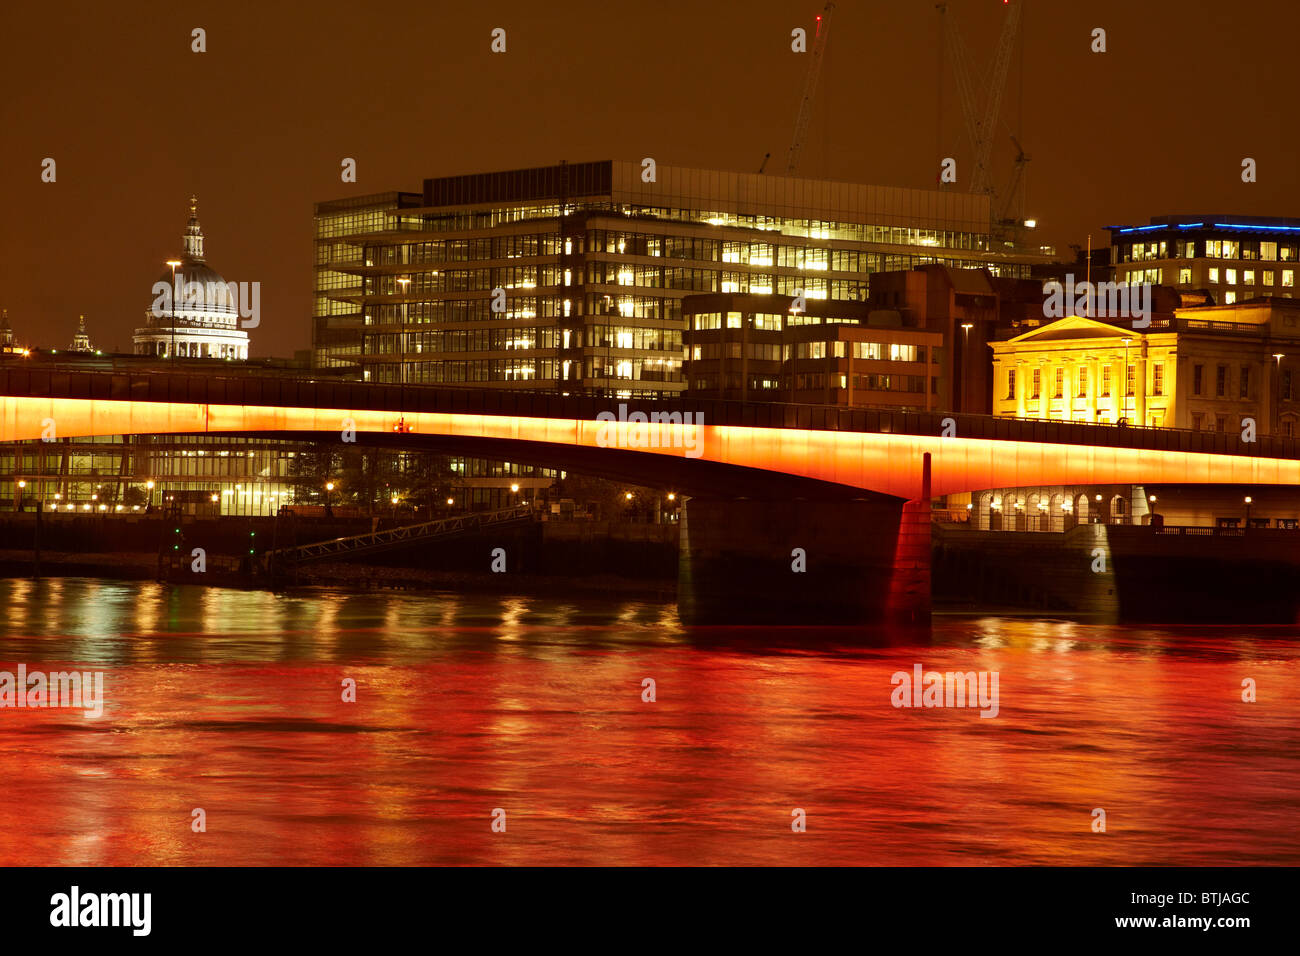 London Bridge, St Paul's Cathedral and River Thames at night, London, England, United Kingdom Stock Photo